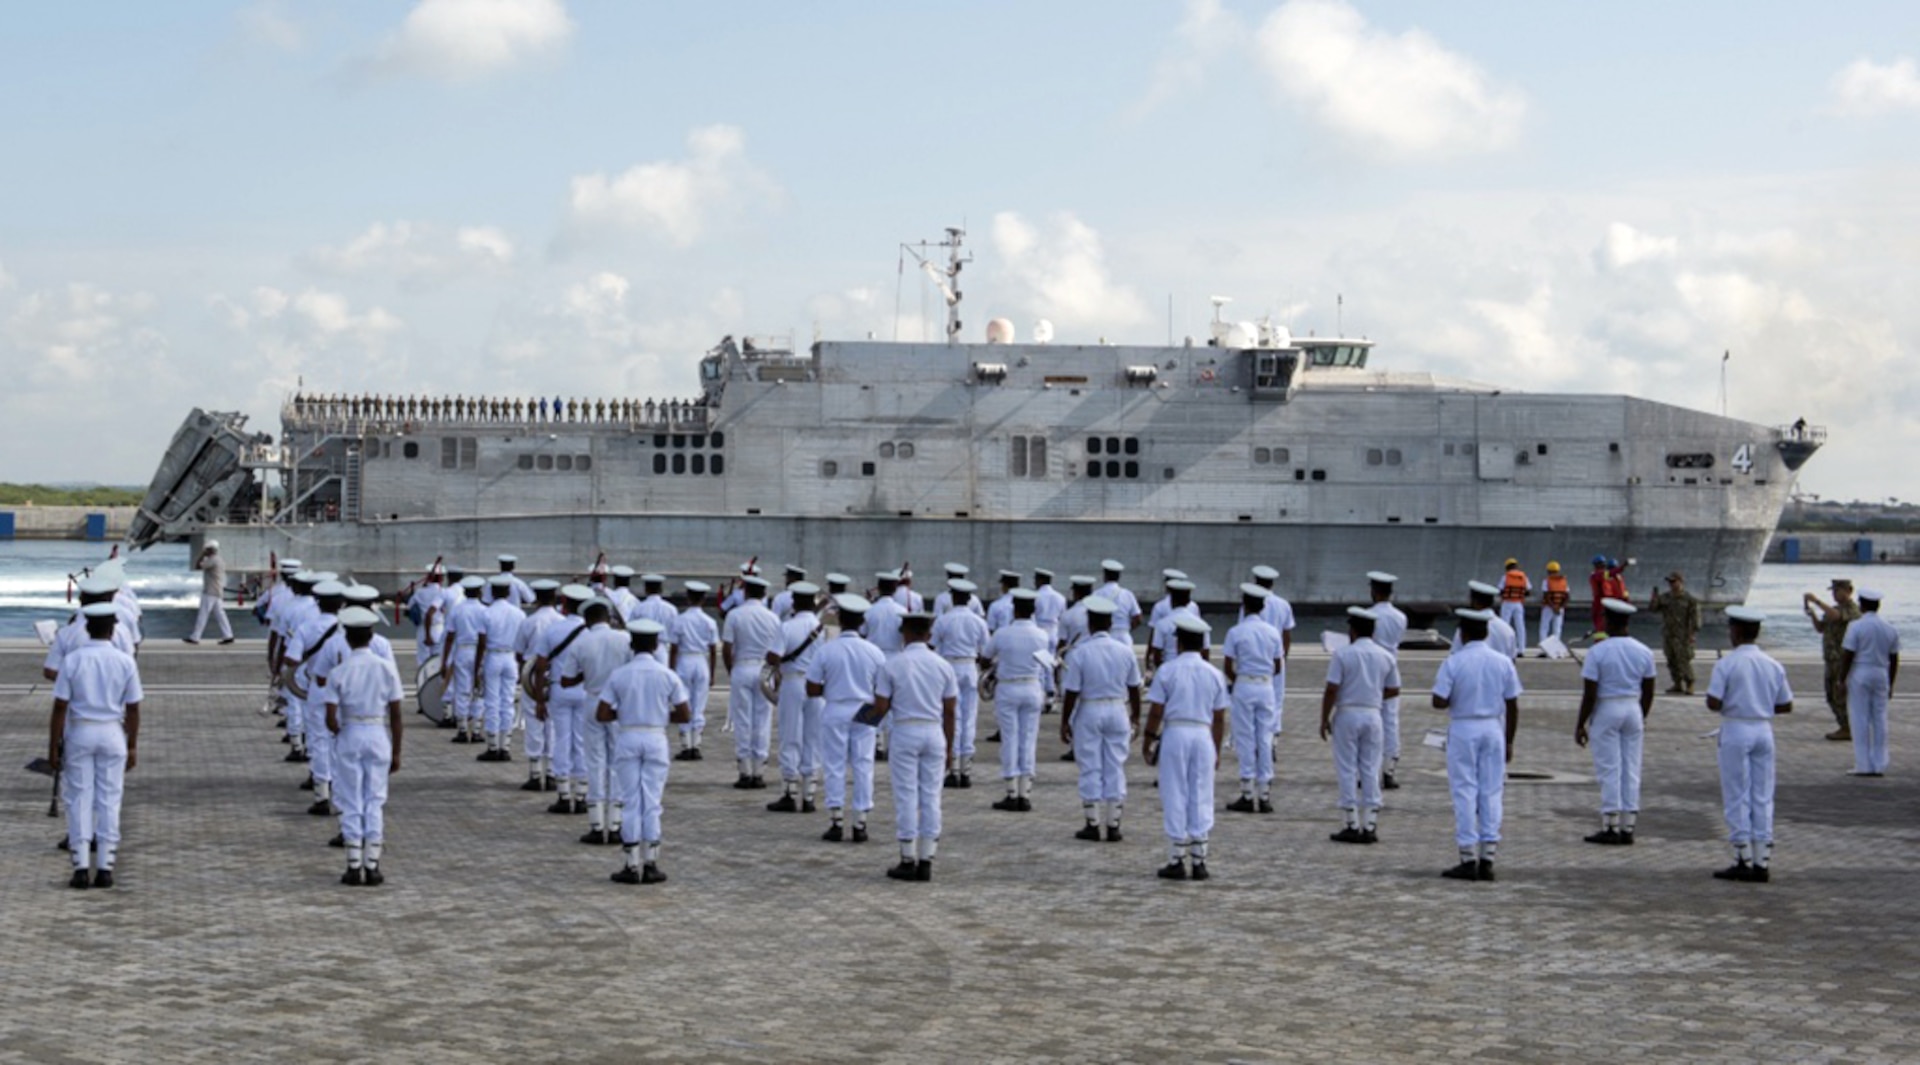 The Sri Lanka Navy Band performs as the expeditionary fast transport ship USNS Fall River (T-EPF-4) arrives in Hambantota to participate in Pacific Partnership 2017 mission stop Sri Lanka, Mar. 7, 2017.   Pacific Partnership is the largest annual multilateral humanitarian assistance and disaster relief preparedness mission conducted in the Indo-Asia-Pacific and aims to enhance regional coordination in areas such as medical readiness and preparedness for manmade and natural disasters. 